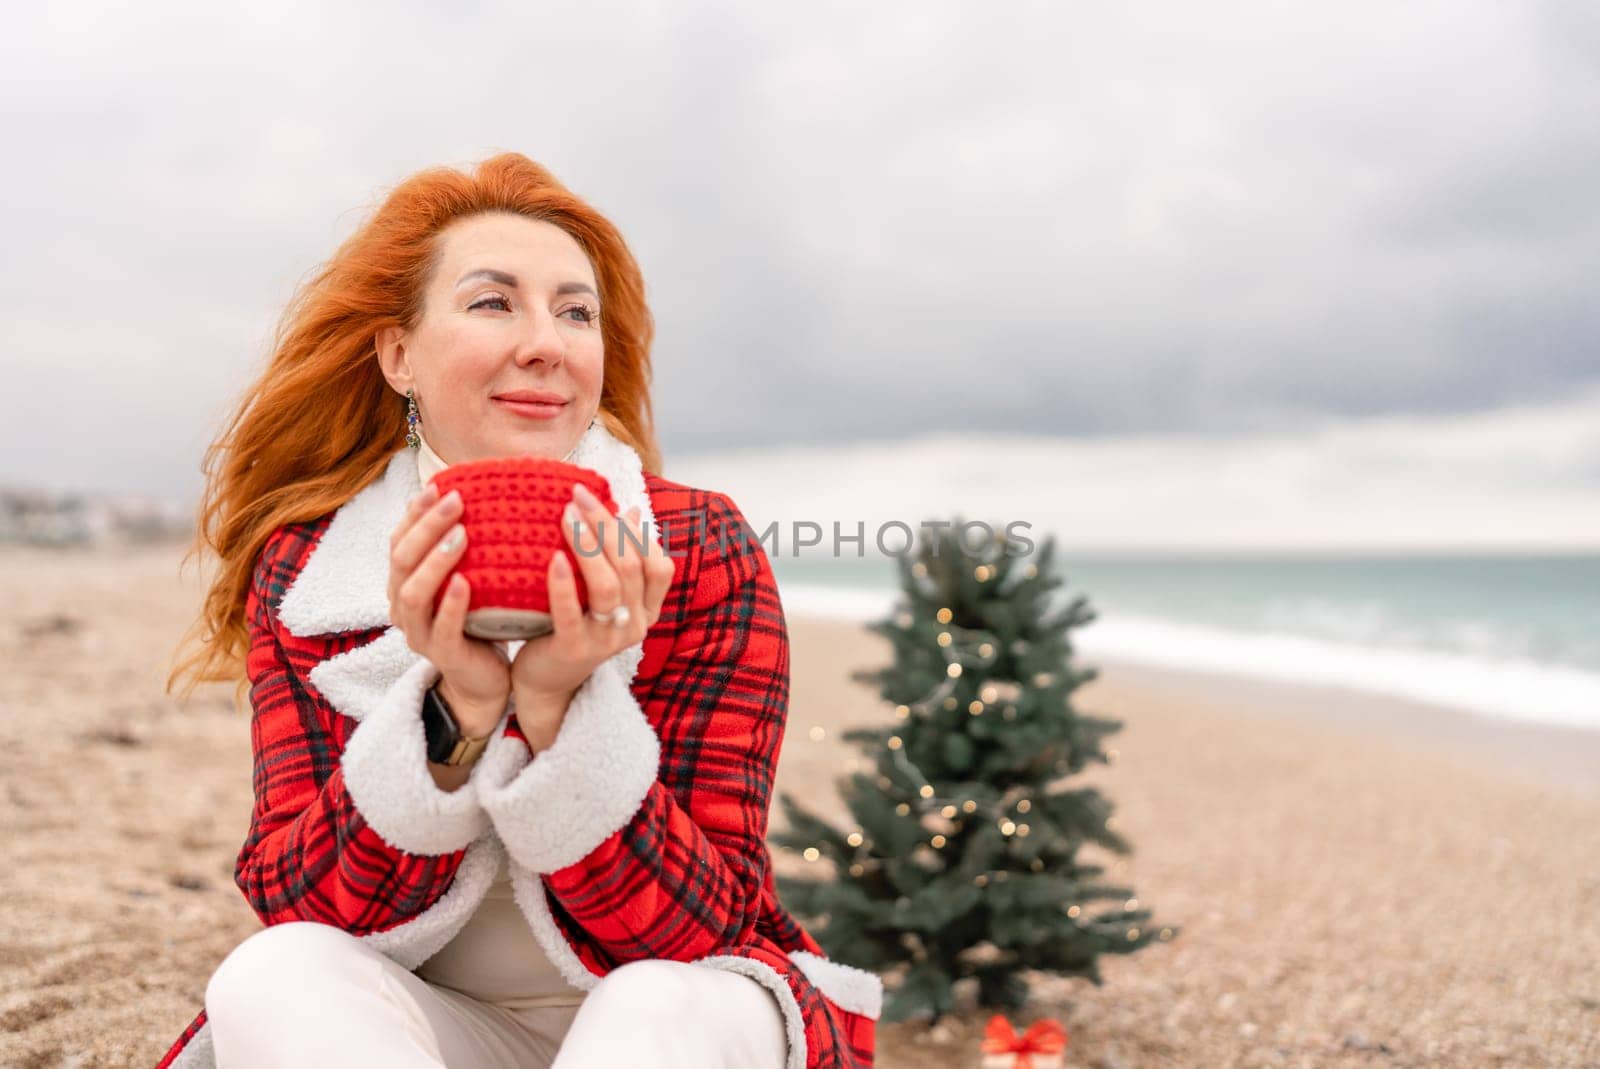 Lady in plaid shirt with a red mug in her hands enjoys beach with Christmas tree. Coastal area. Christmas, New Year holidays concep by Matiunina